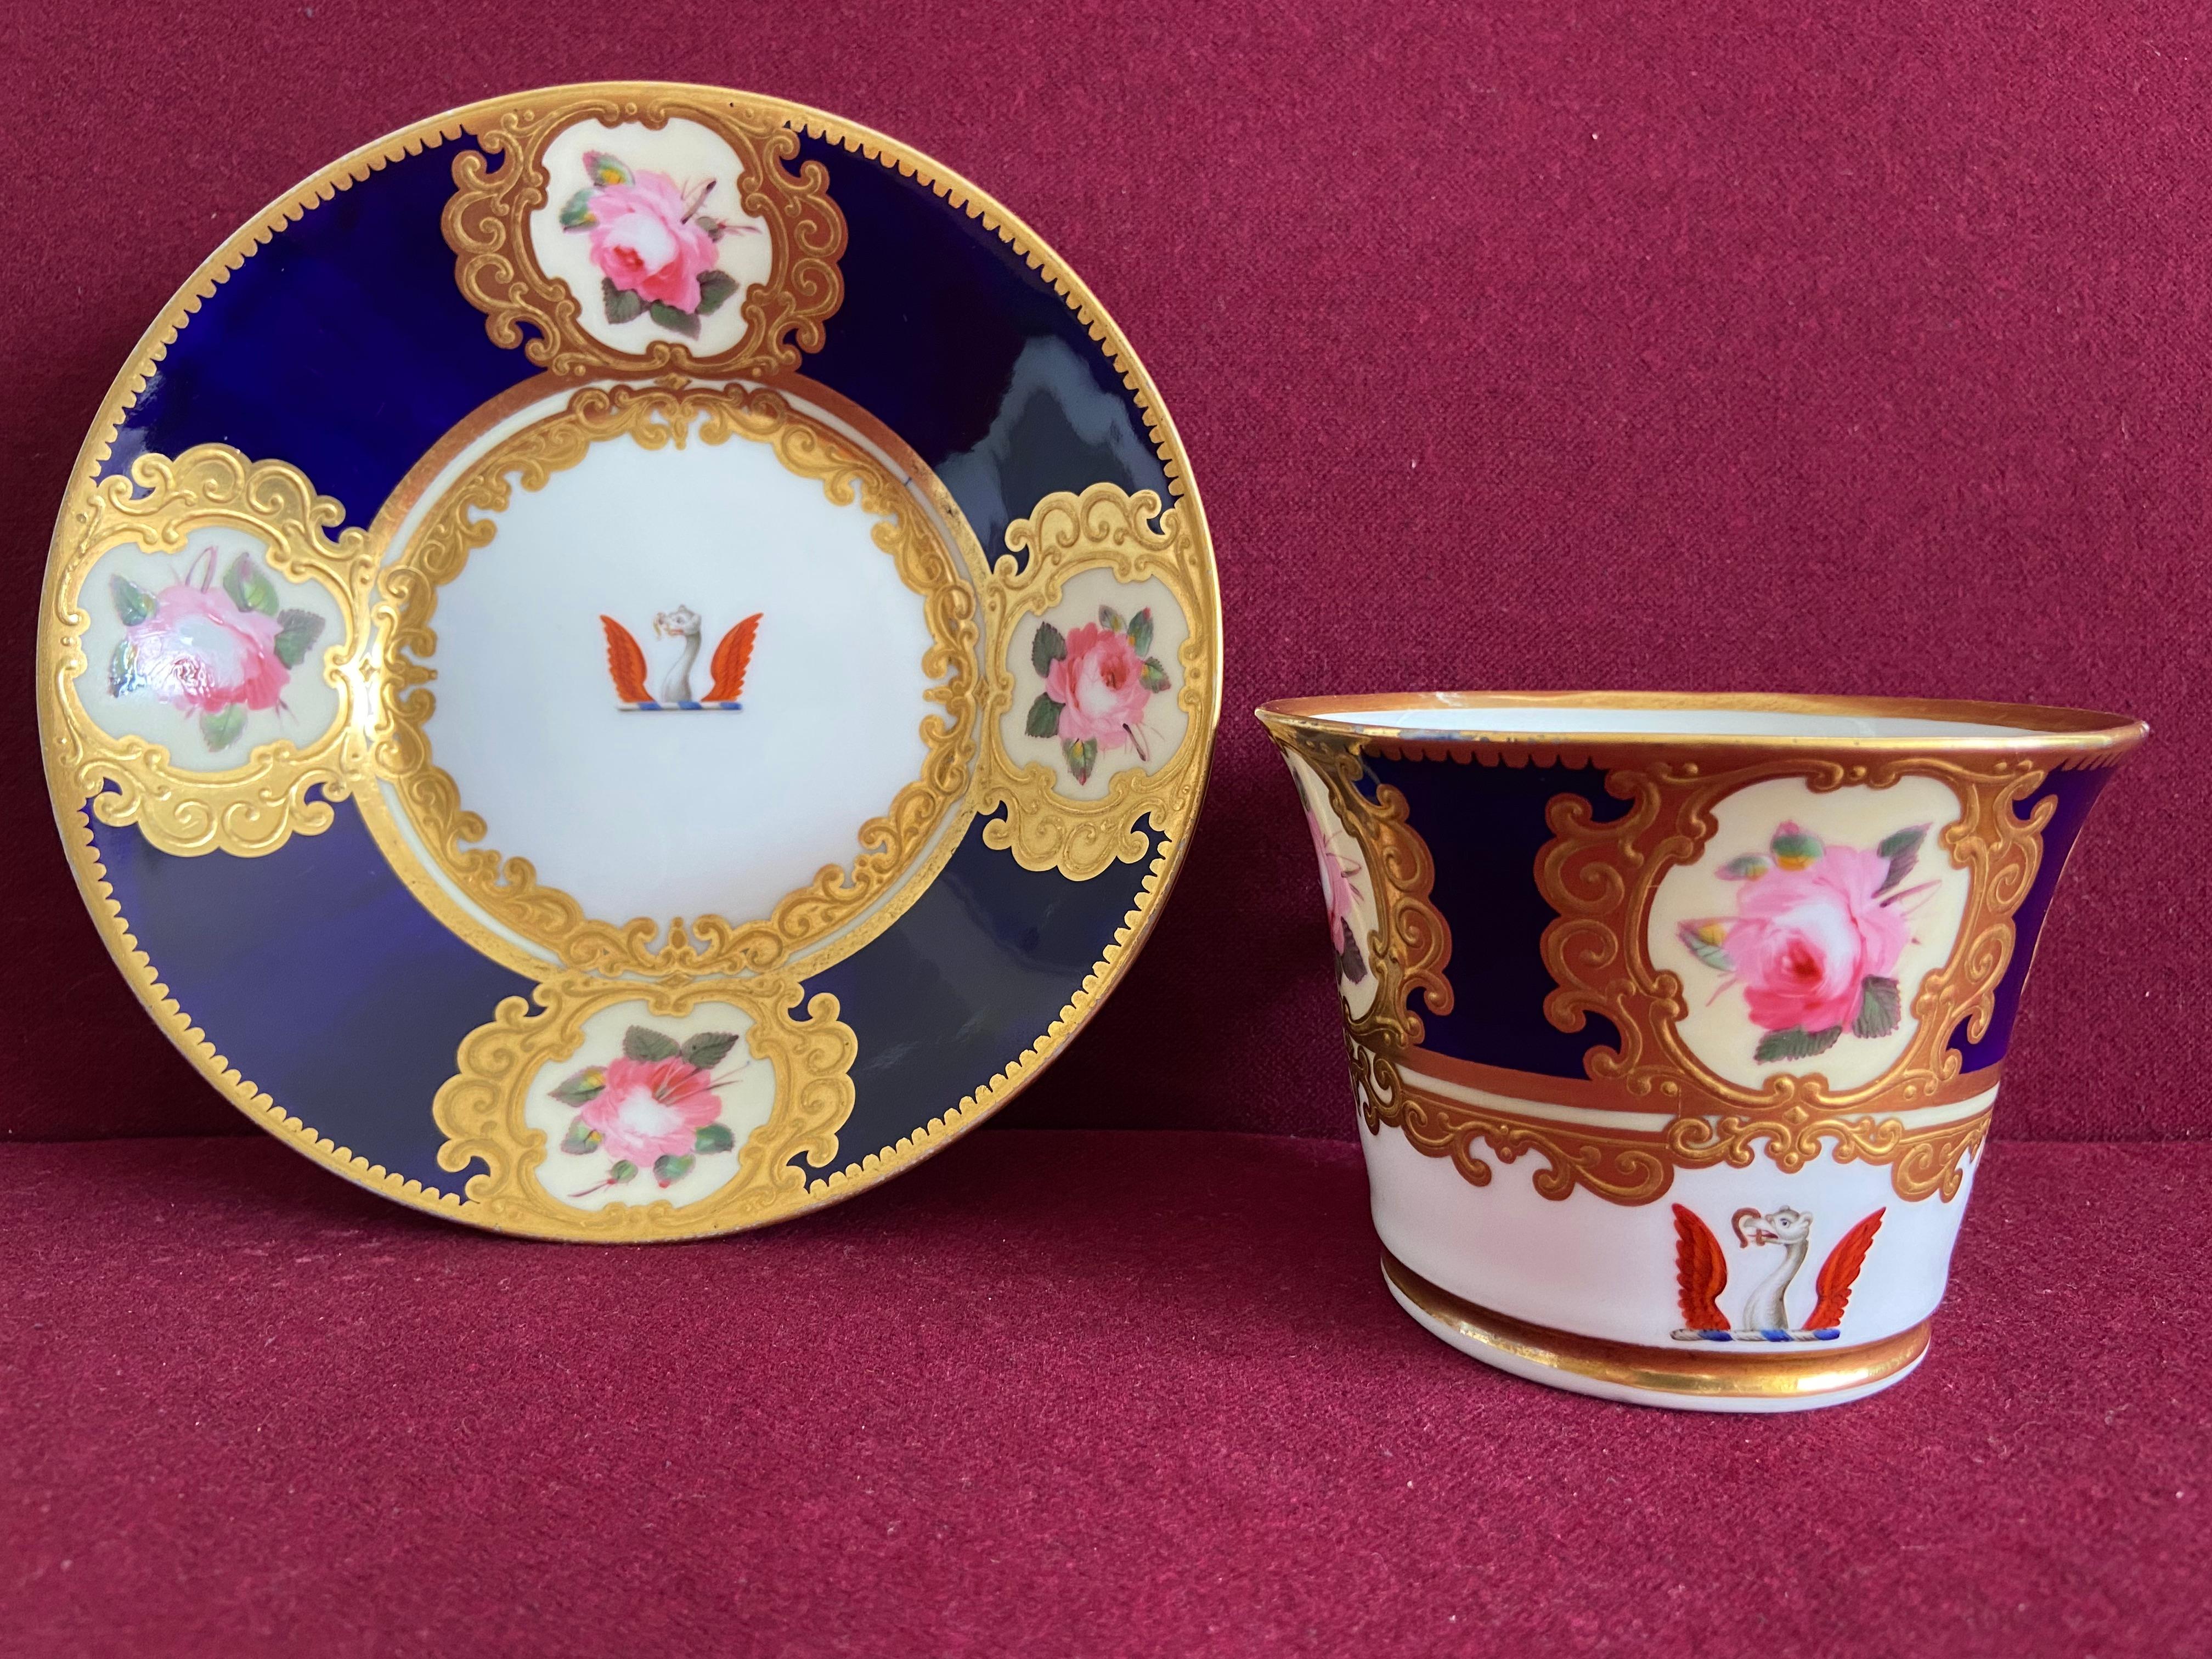 A fine and rare Chamberlain Worcester 'Baden' shape breakfast cup and saucer decorated in pattern 864 with the crest of Sir John Hullock c.1815. An ostrich's head between two wings, holding in the mouth a horse-shoe.

Sir John Hullock 1767-1829 was